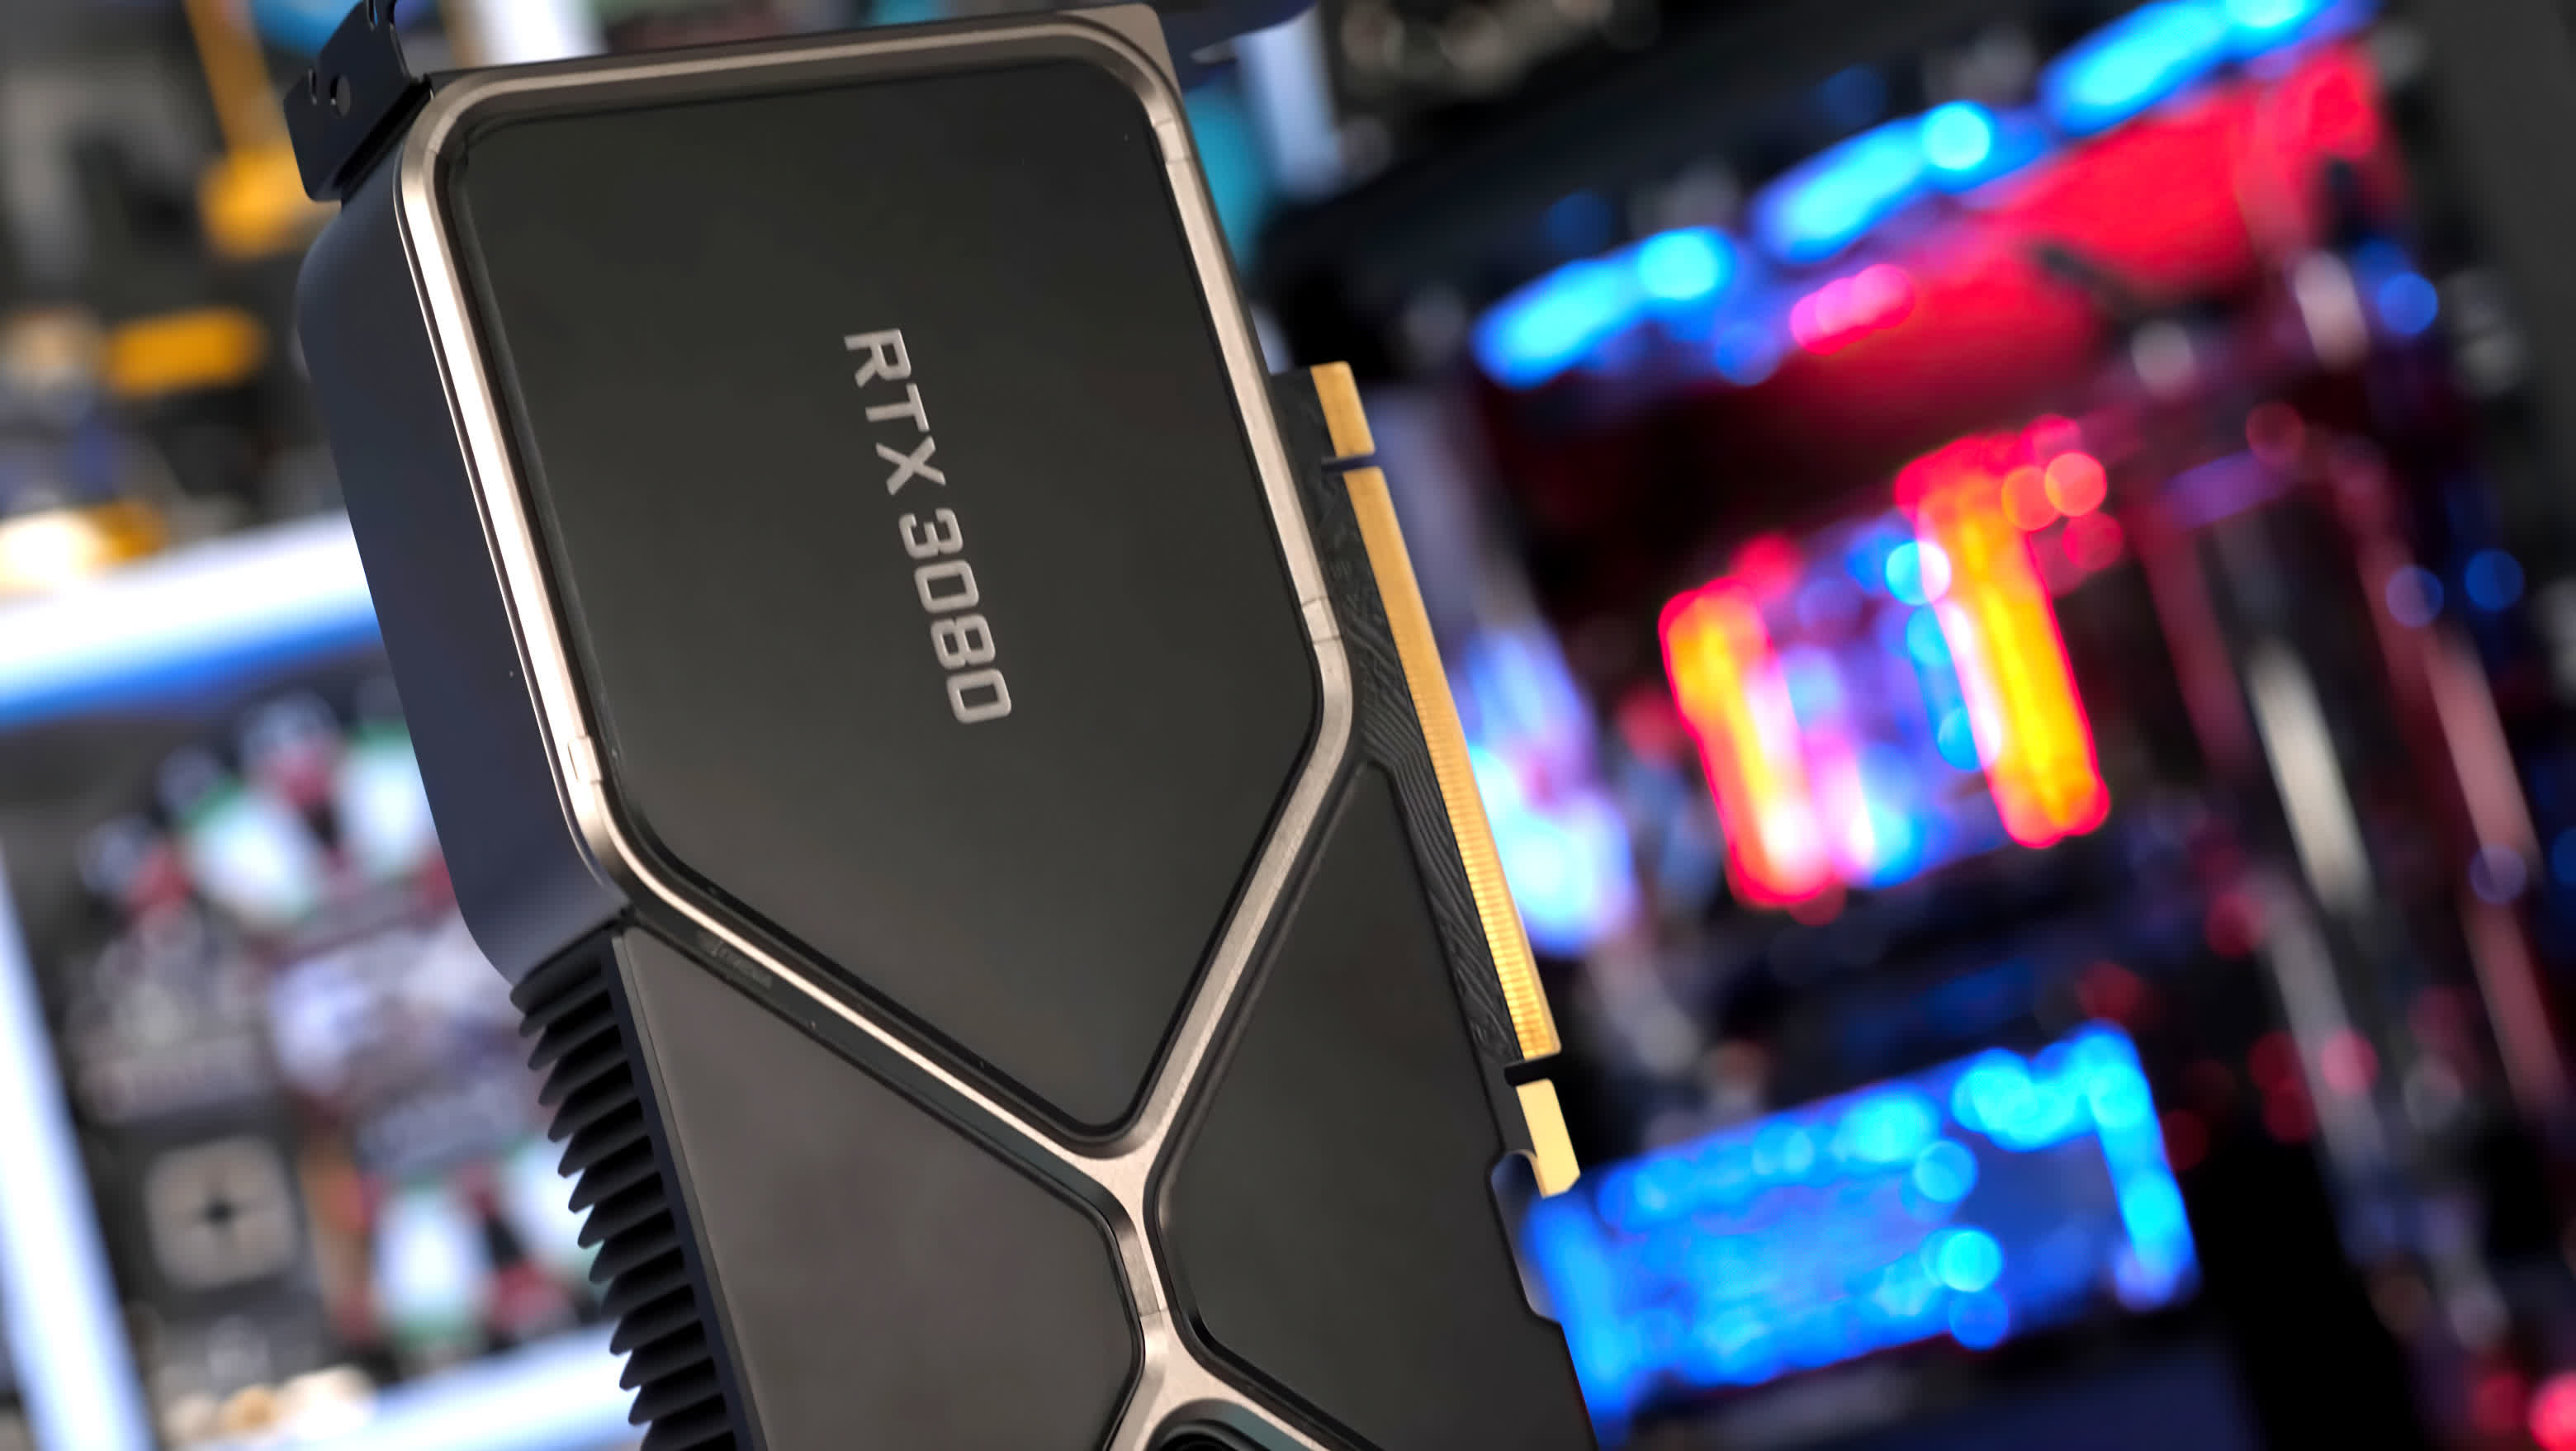 Expect RTX 3000 shortages to get even worse this quarter, warns retailer